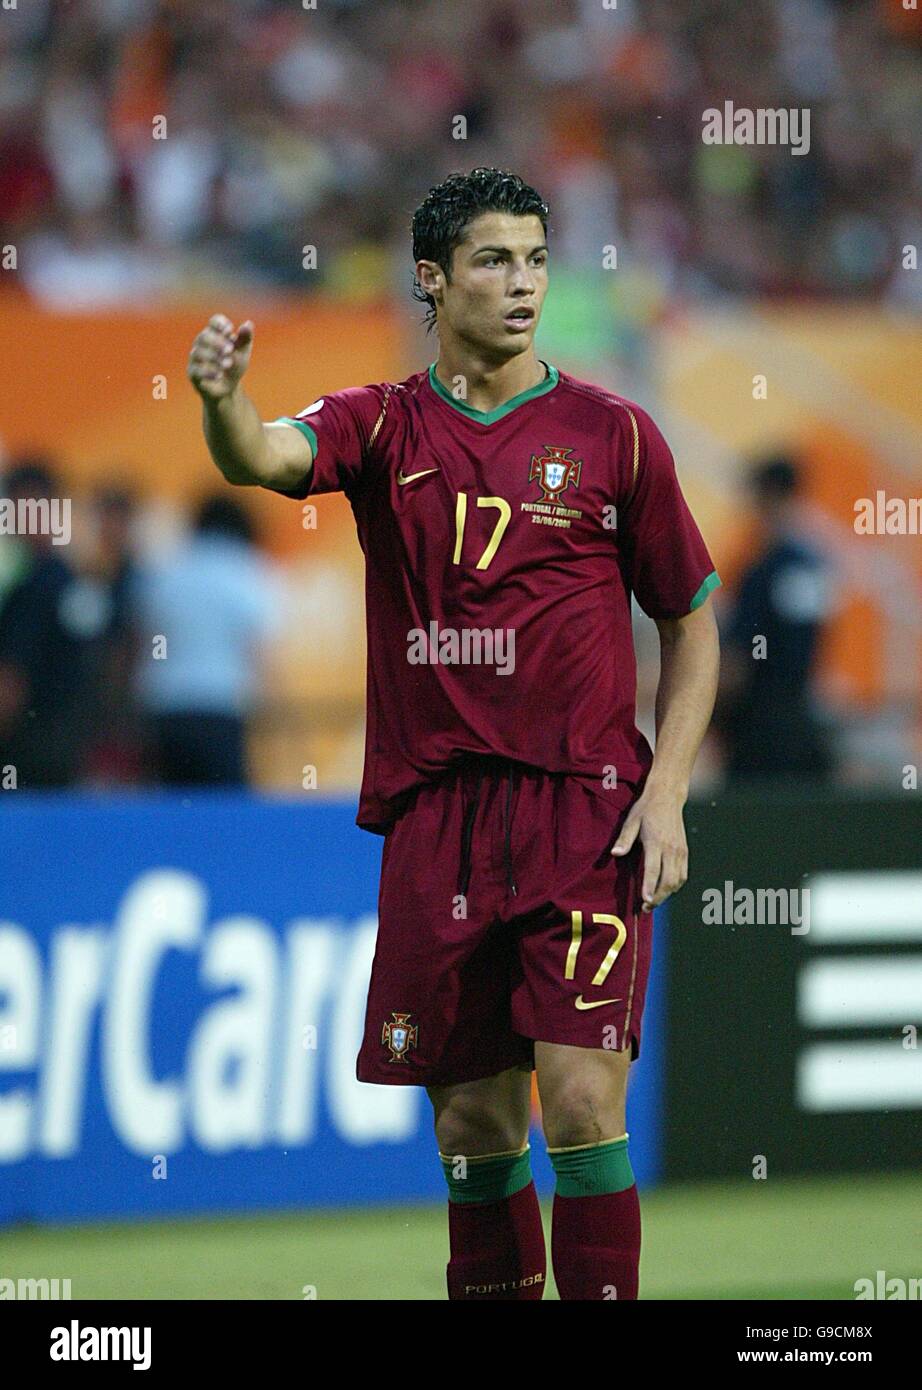 Soccer - 2006 FIFA World Cup Germany - Second Round - Portugal v Holland - Franken-Stadion. Cristiano Ronaldo, Portugal Stock Photo